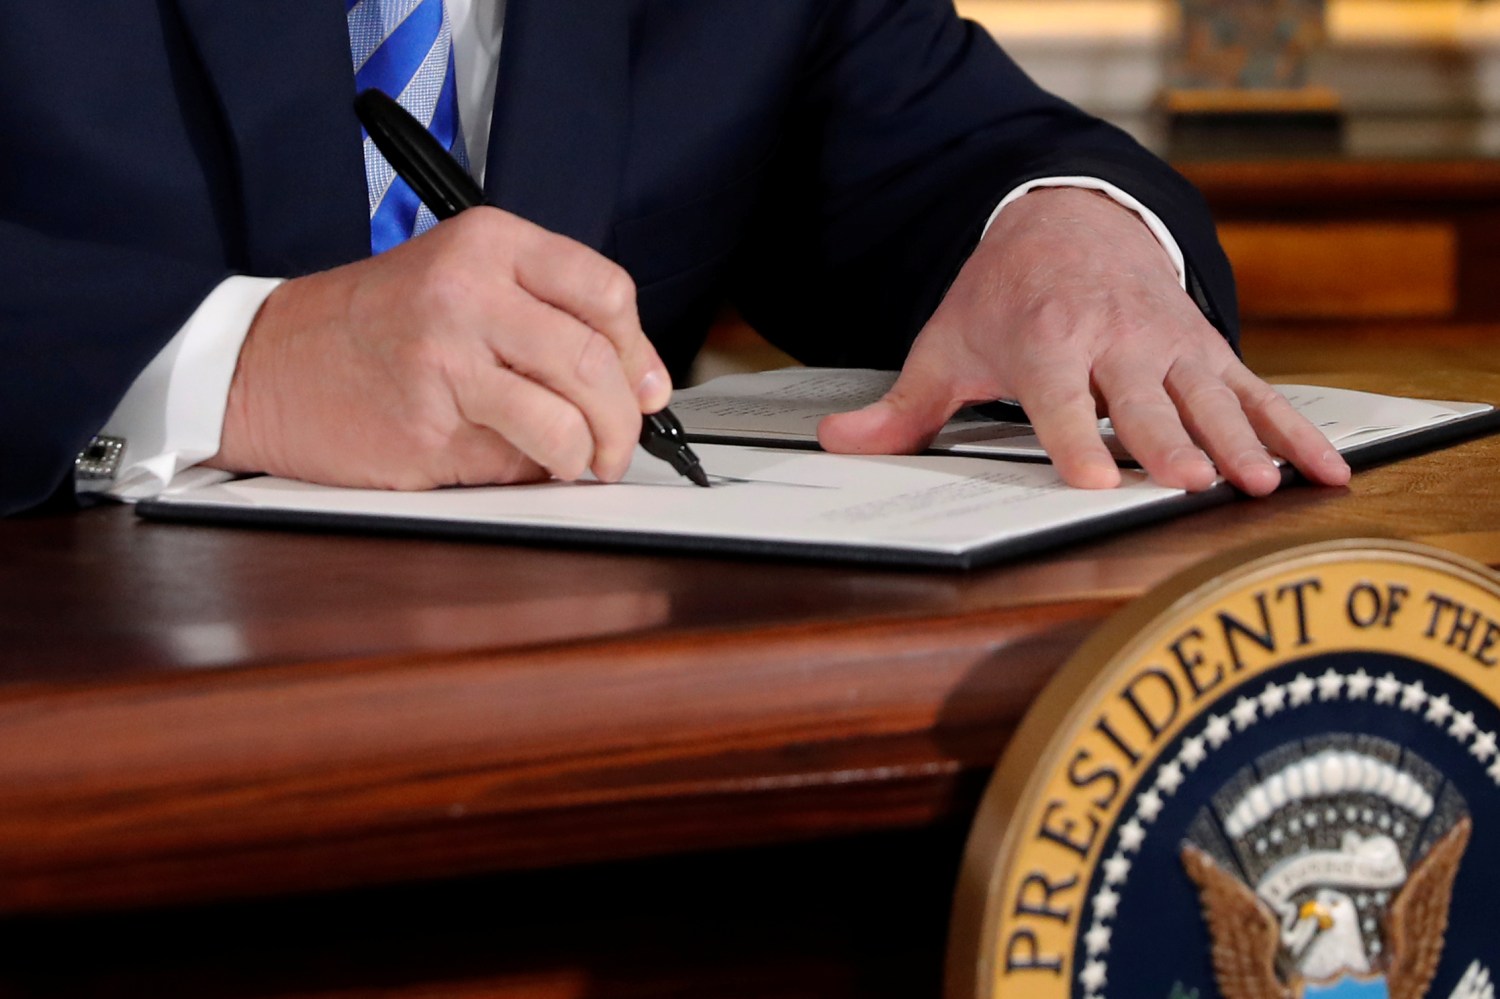 U.S. President Donald Trump signs a proclamation declaring his intention to withdraw from the JCPOA Iran nuclear agreement in the Diplomatic Room at the White House in Washington, U.S. May 8, 2018.  REUTERS/Jonathan Ernst - RC173F474E20